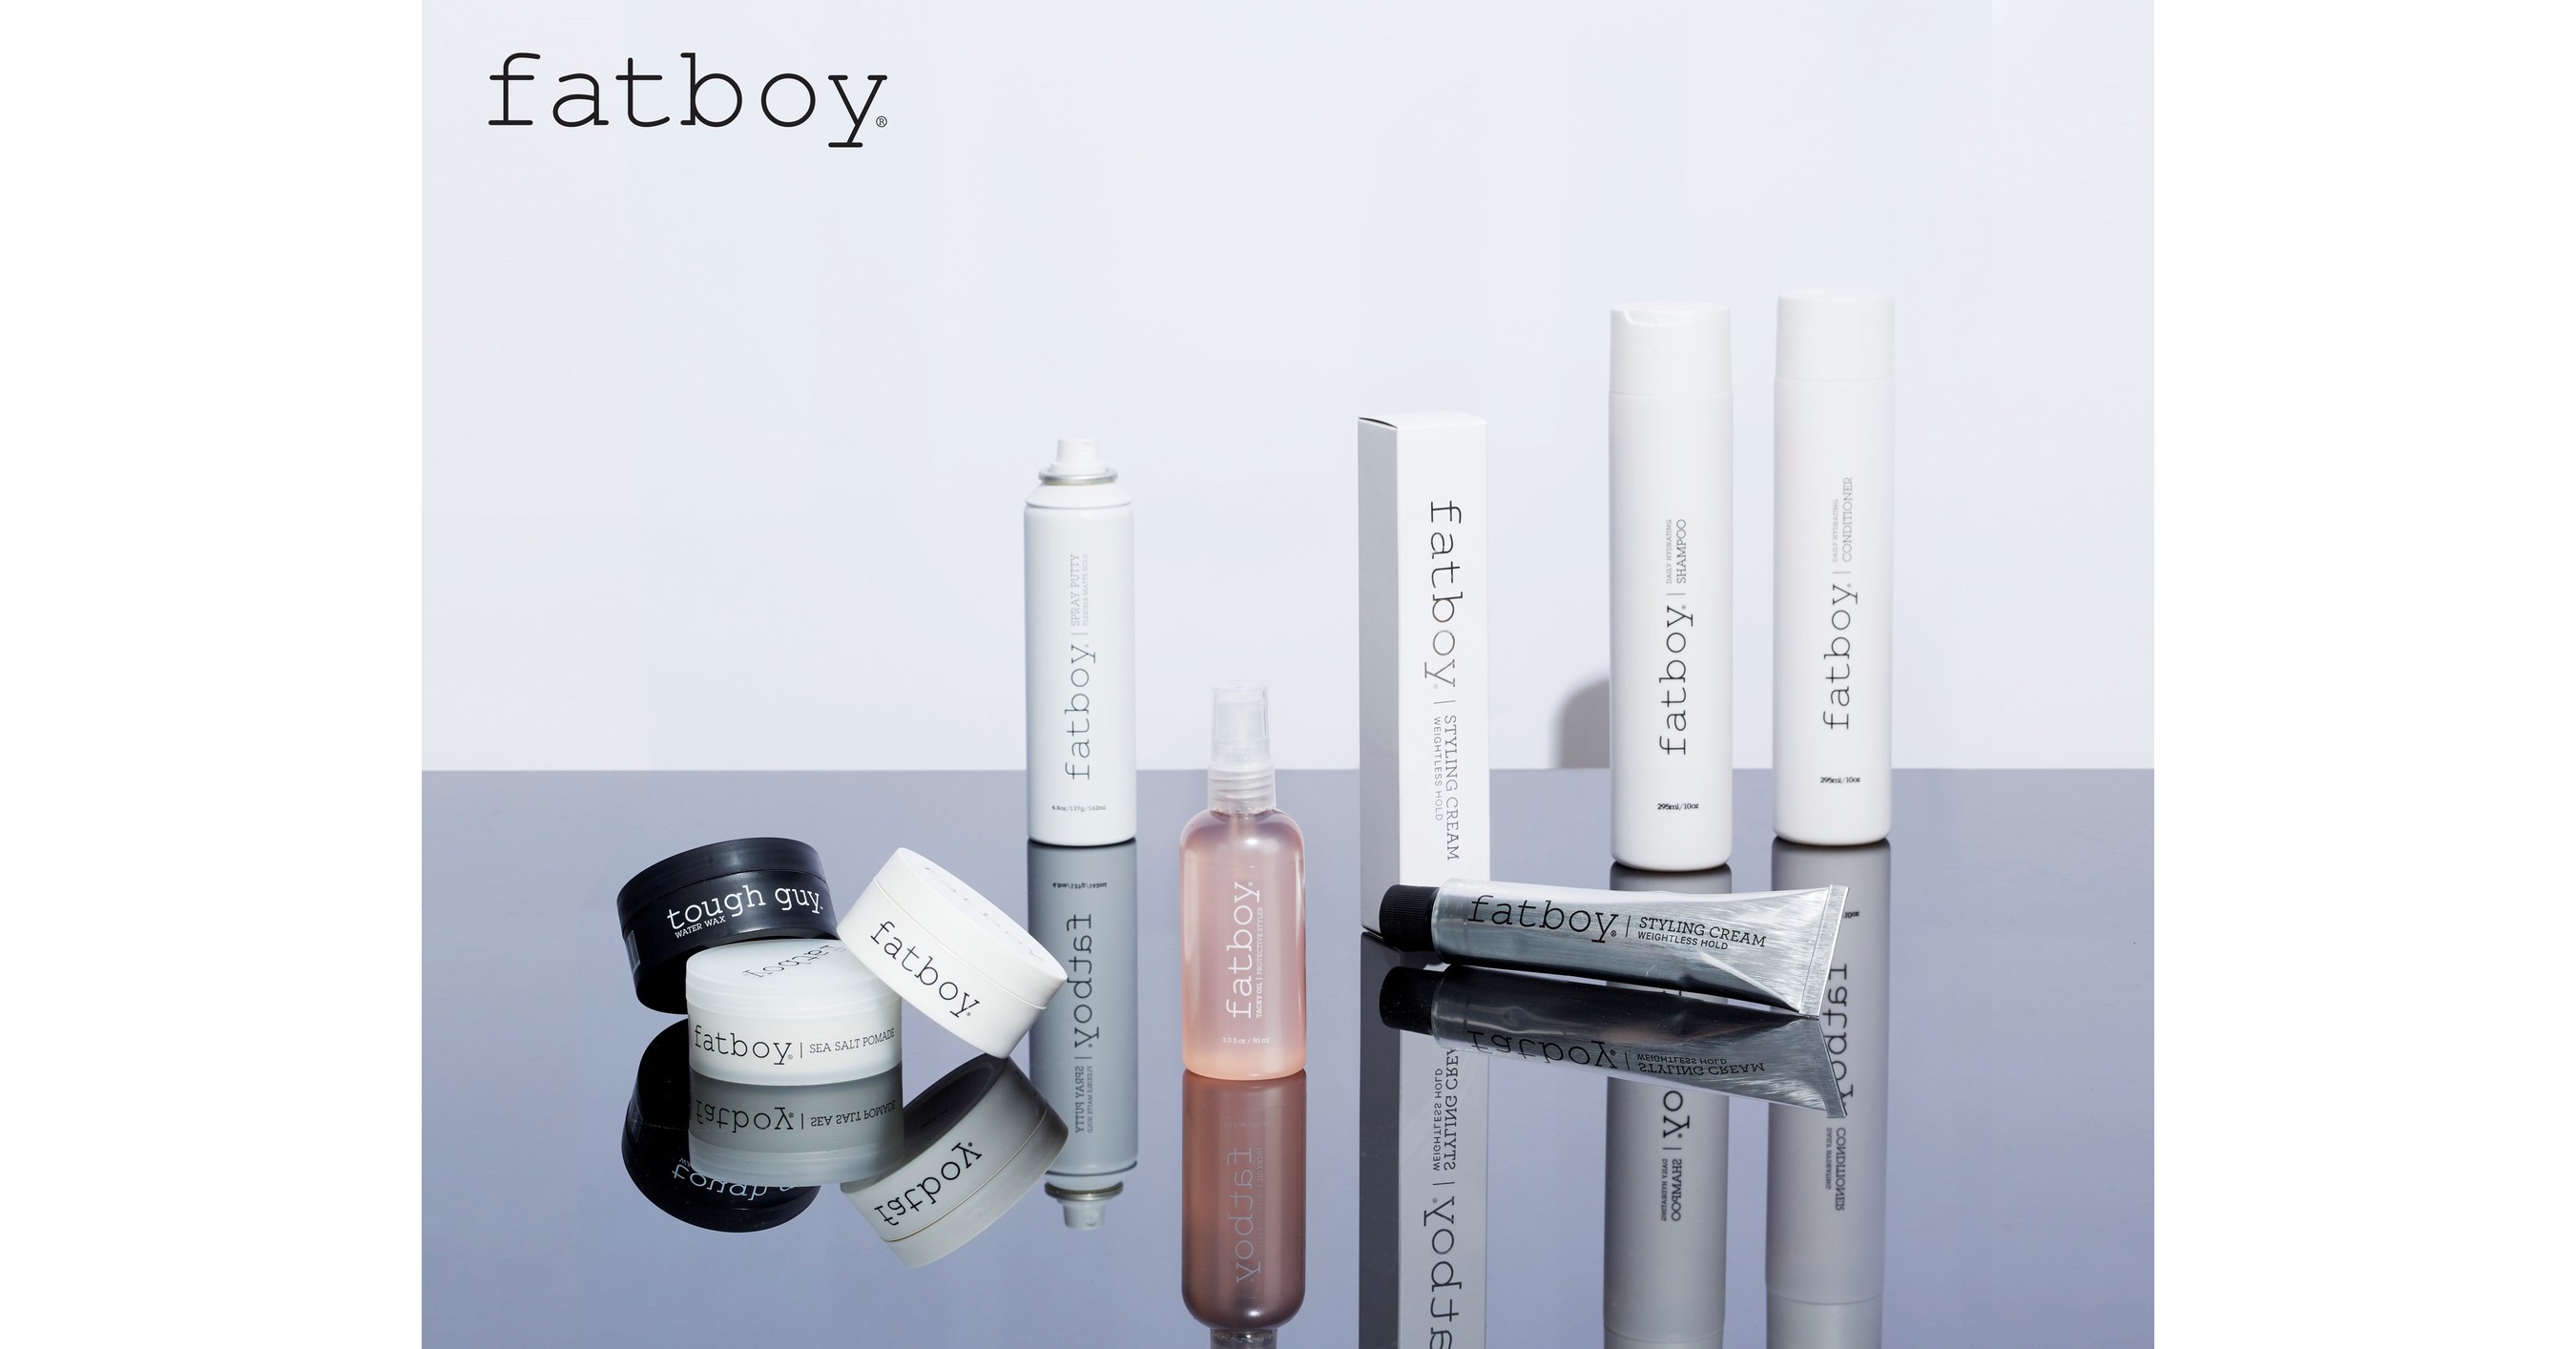 Fatboy Haircare Announces Distribution With L'Oreal SalonCentric And  State|RDA To Increase Its Distribution In Over 800 Stores Nationally